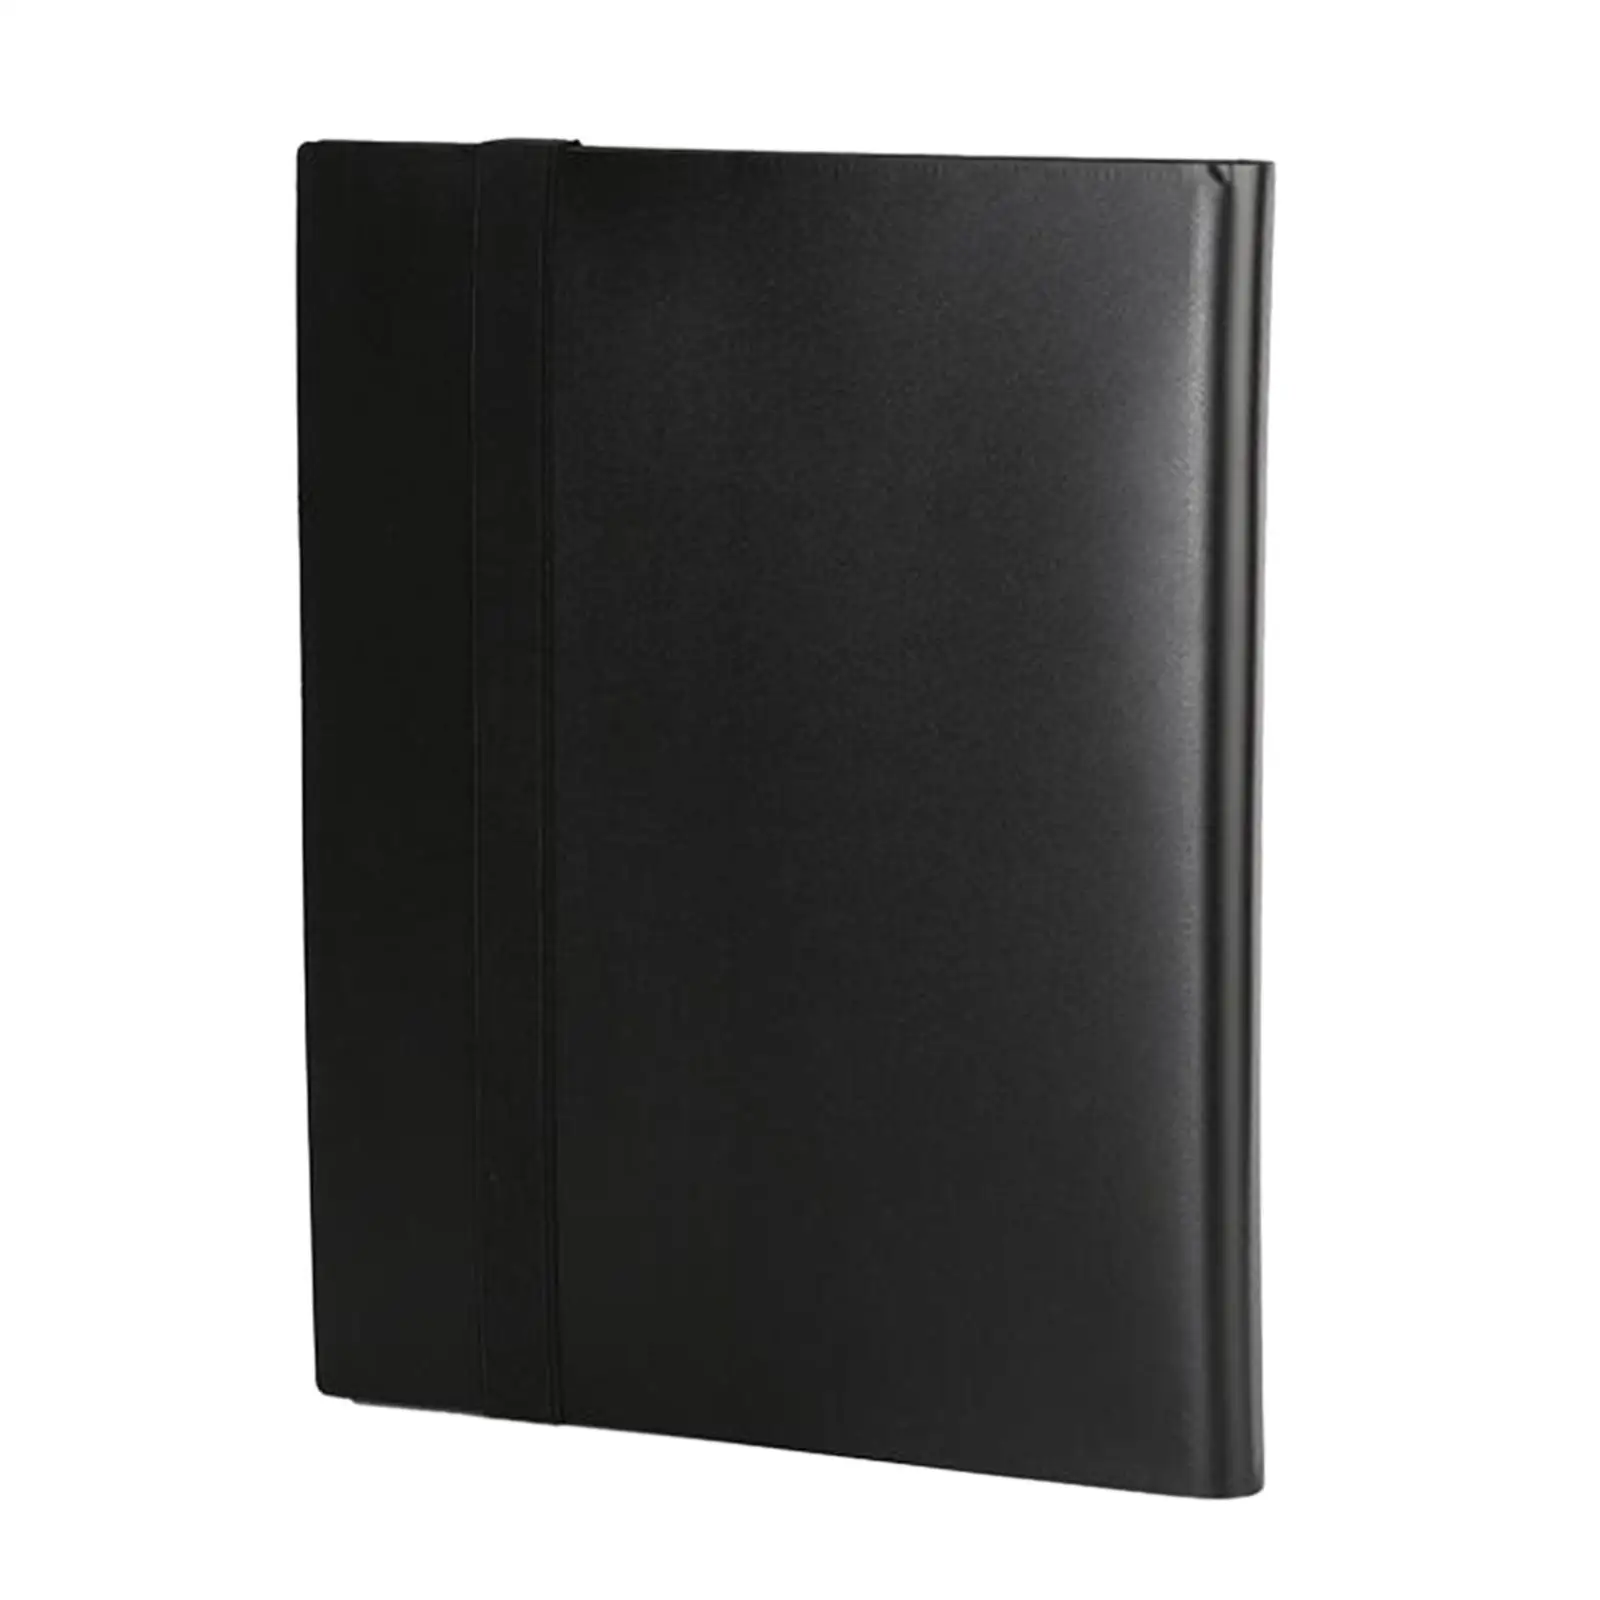 Album Display Binder Holder Clear Page Protector 9 Pocket Trading Binder 540 Double Sided Album for TCG Cards Sports Cards